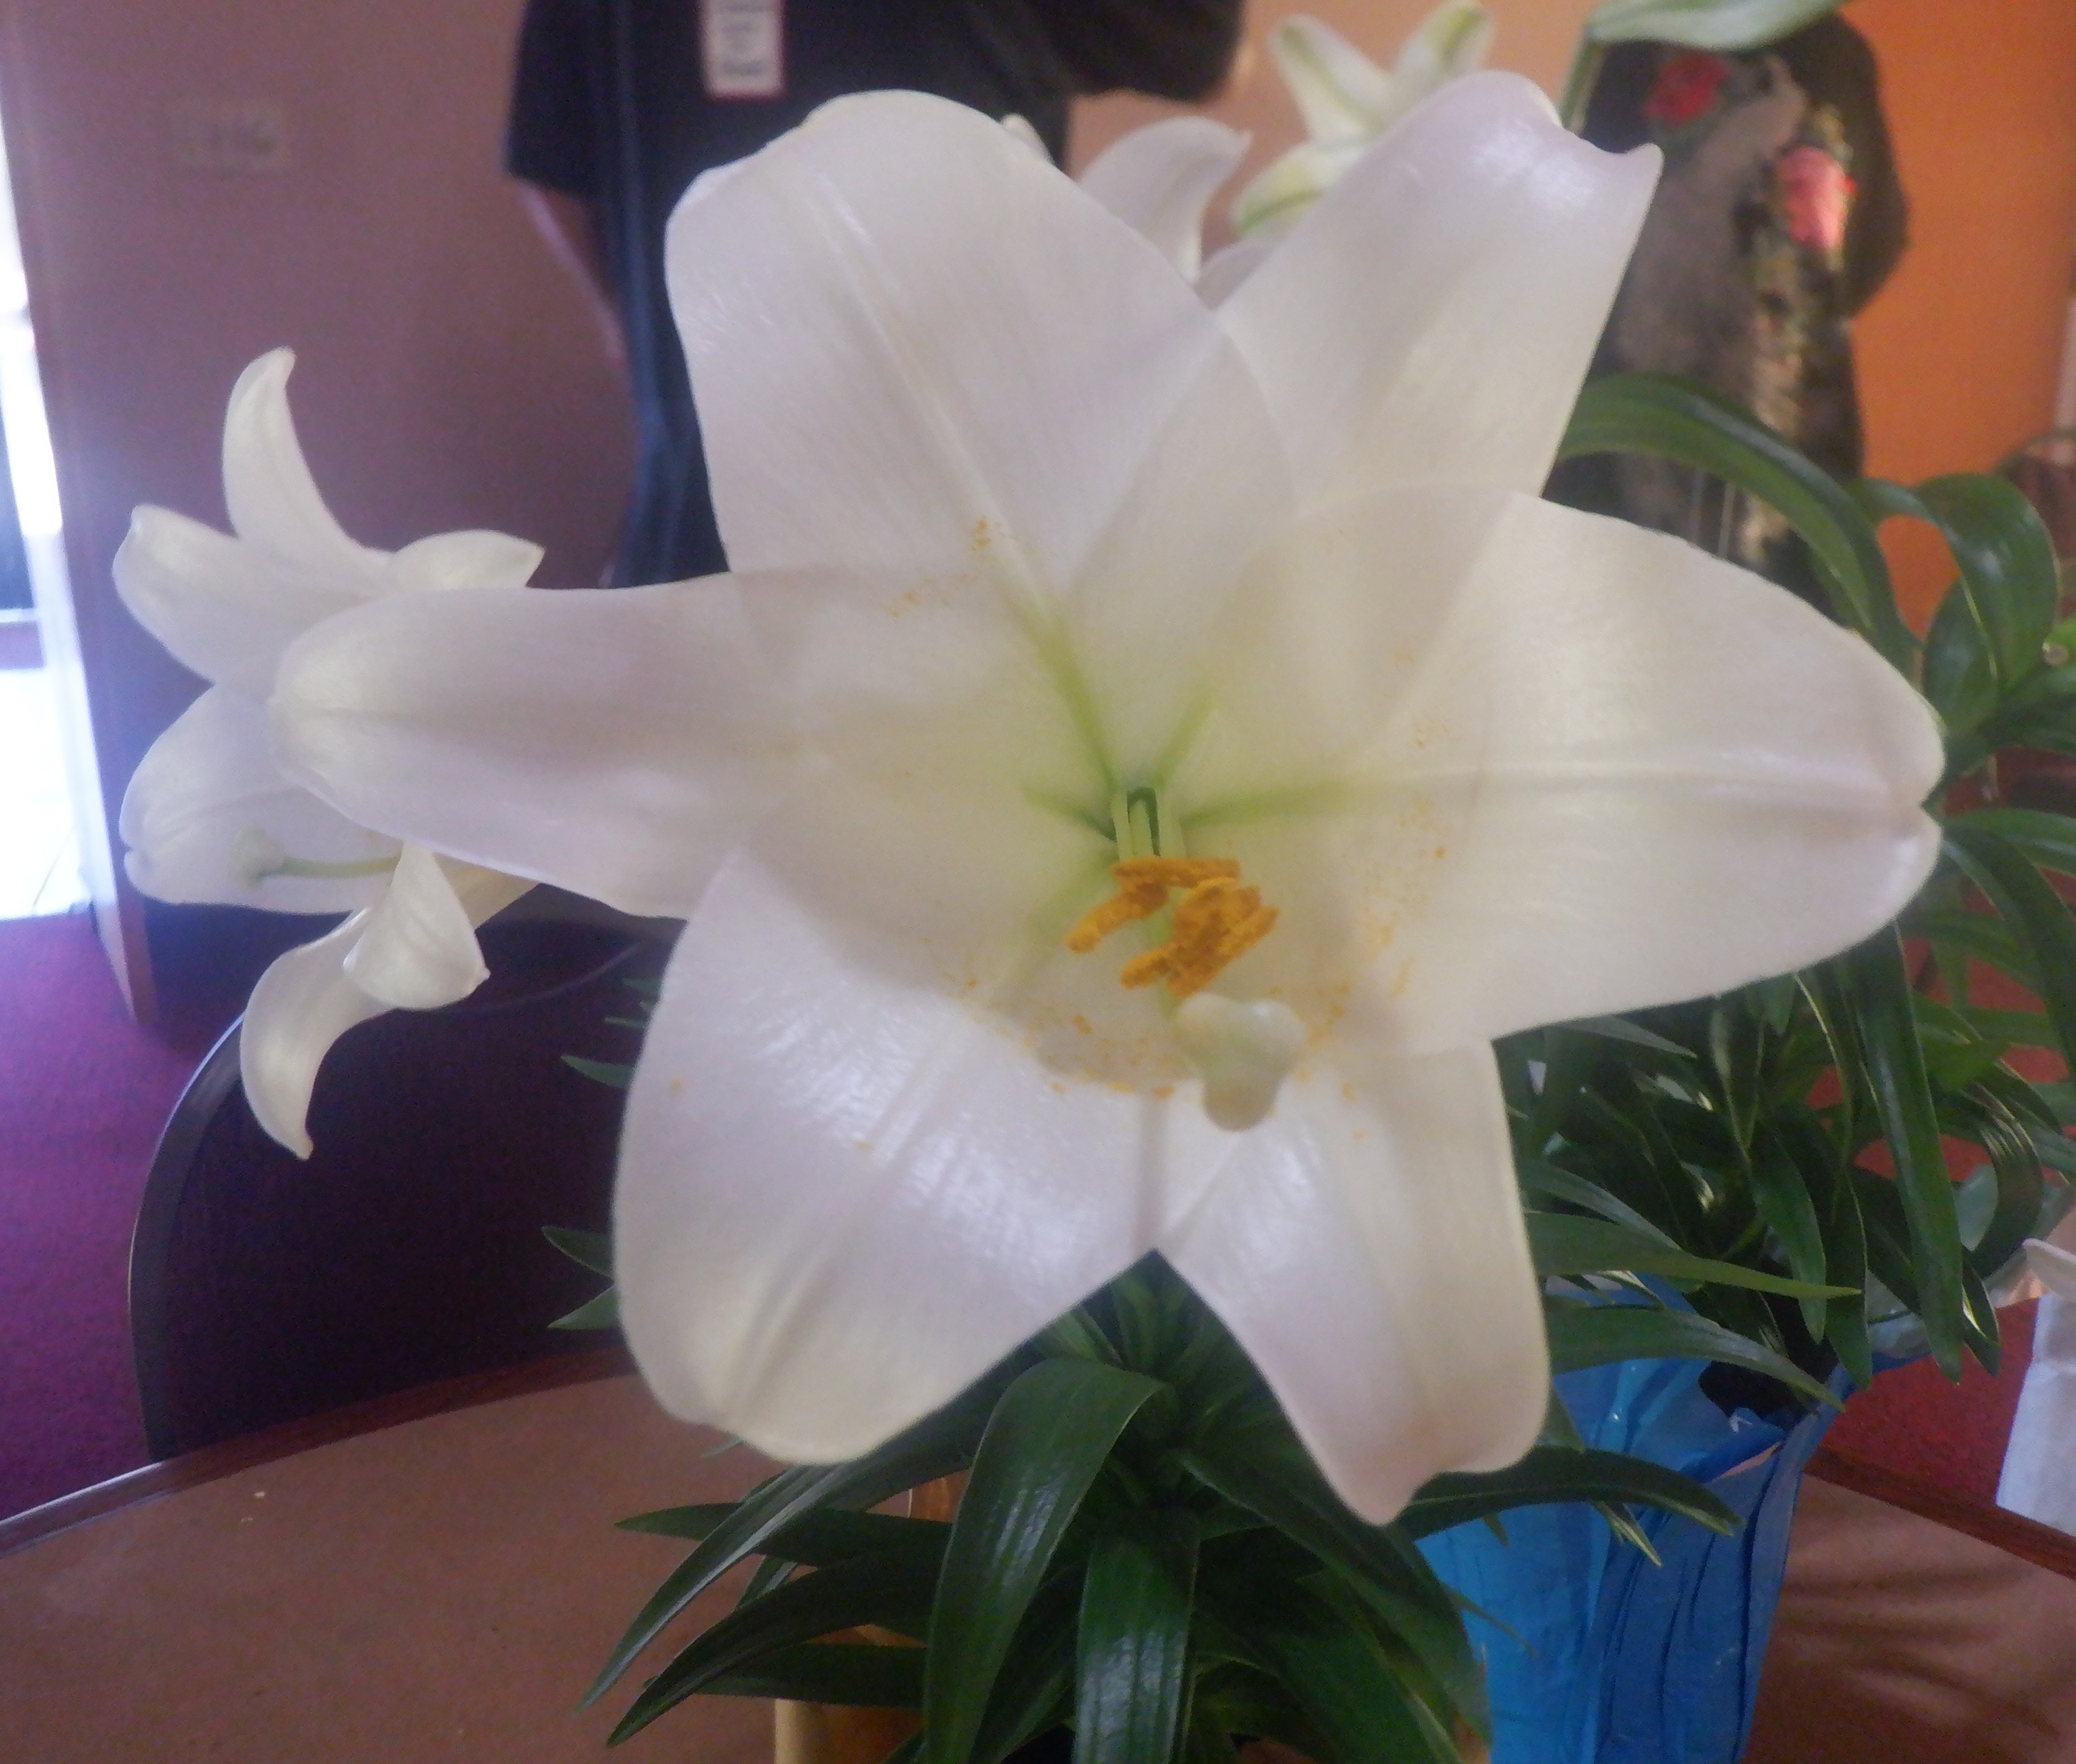 Photo I took of an Easter Lily at church this morning 3-31-24